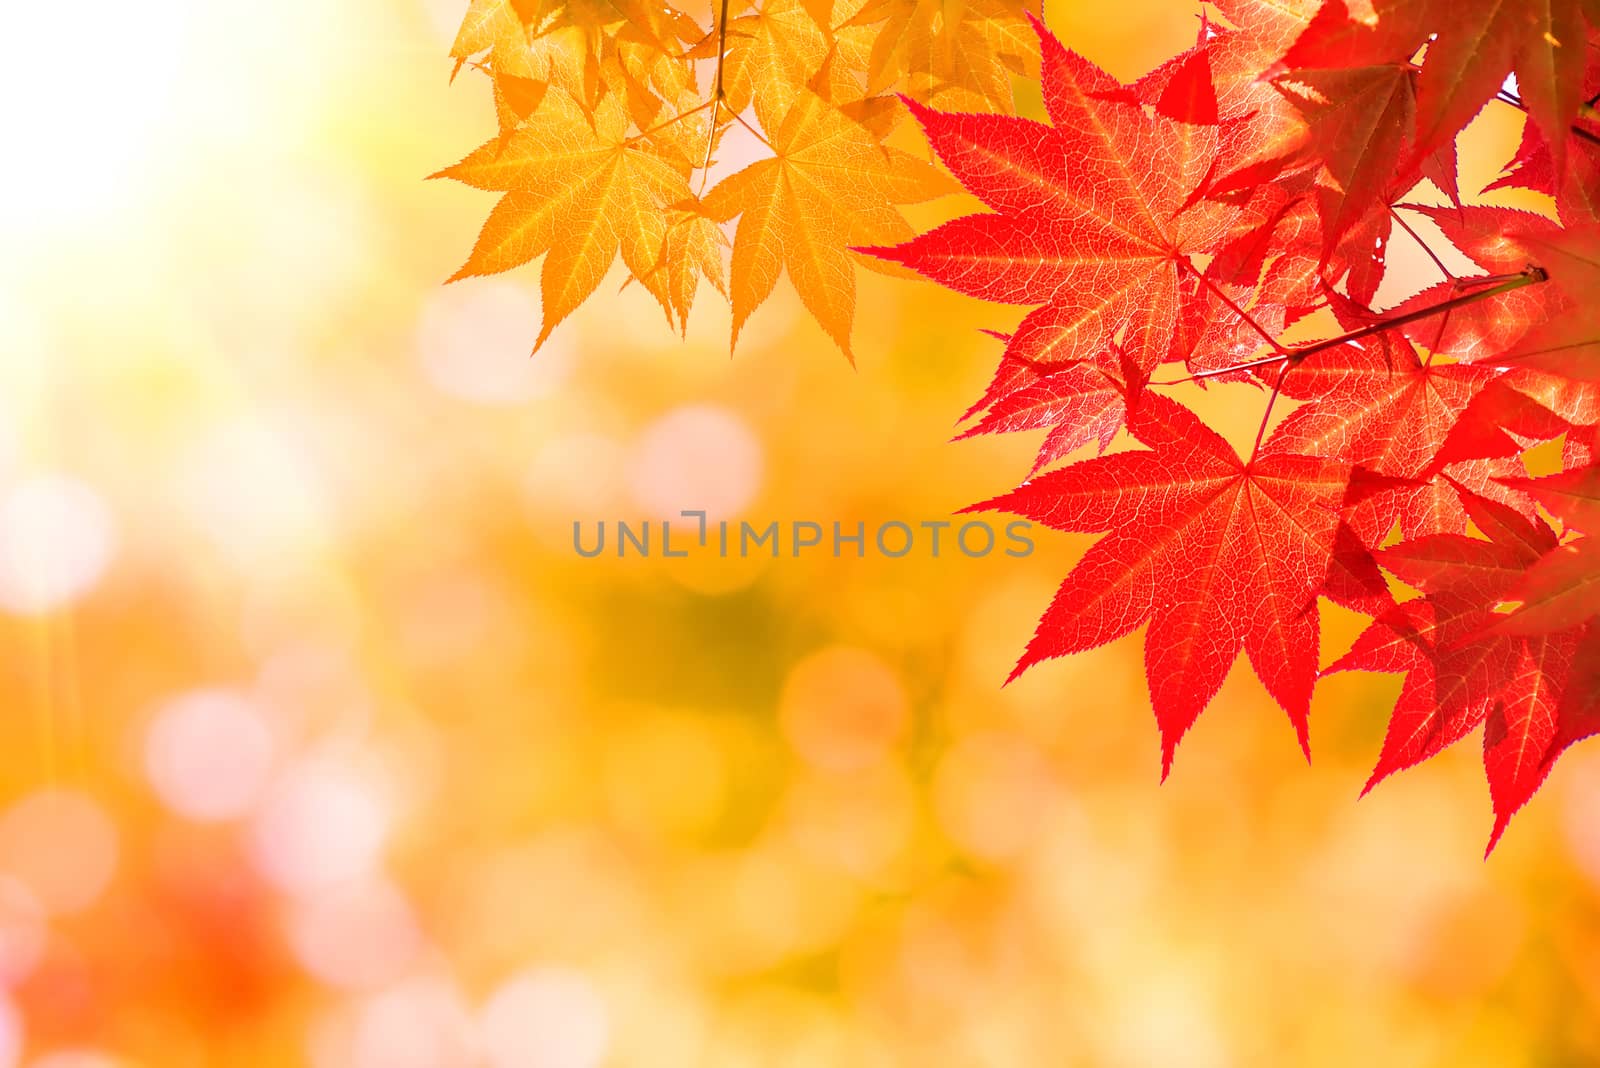 Autumn maple leaves. by gutarphotoghaphy